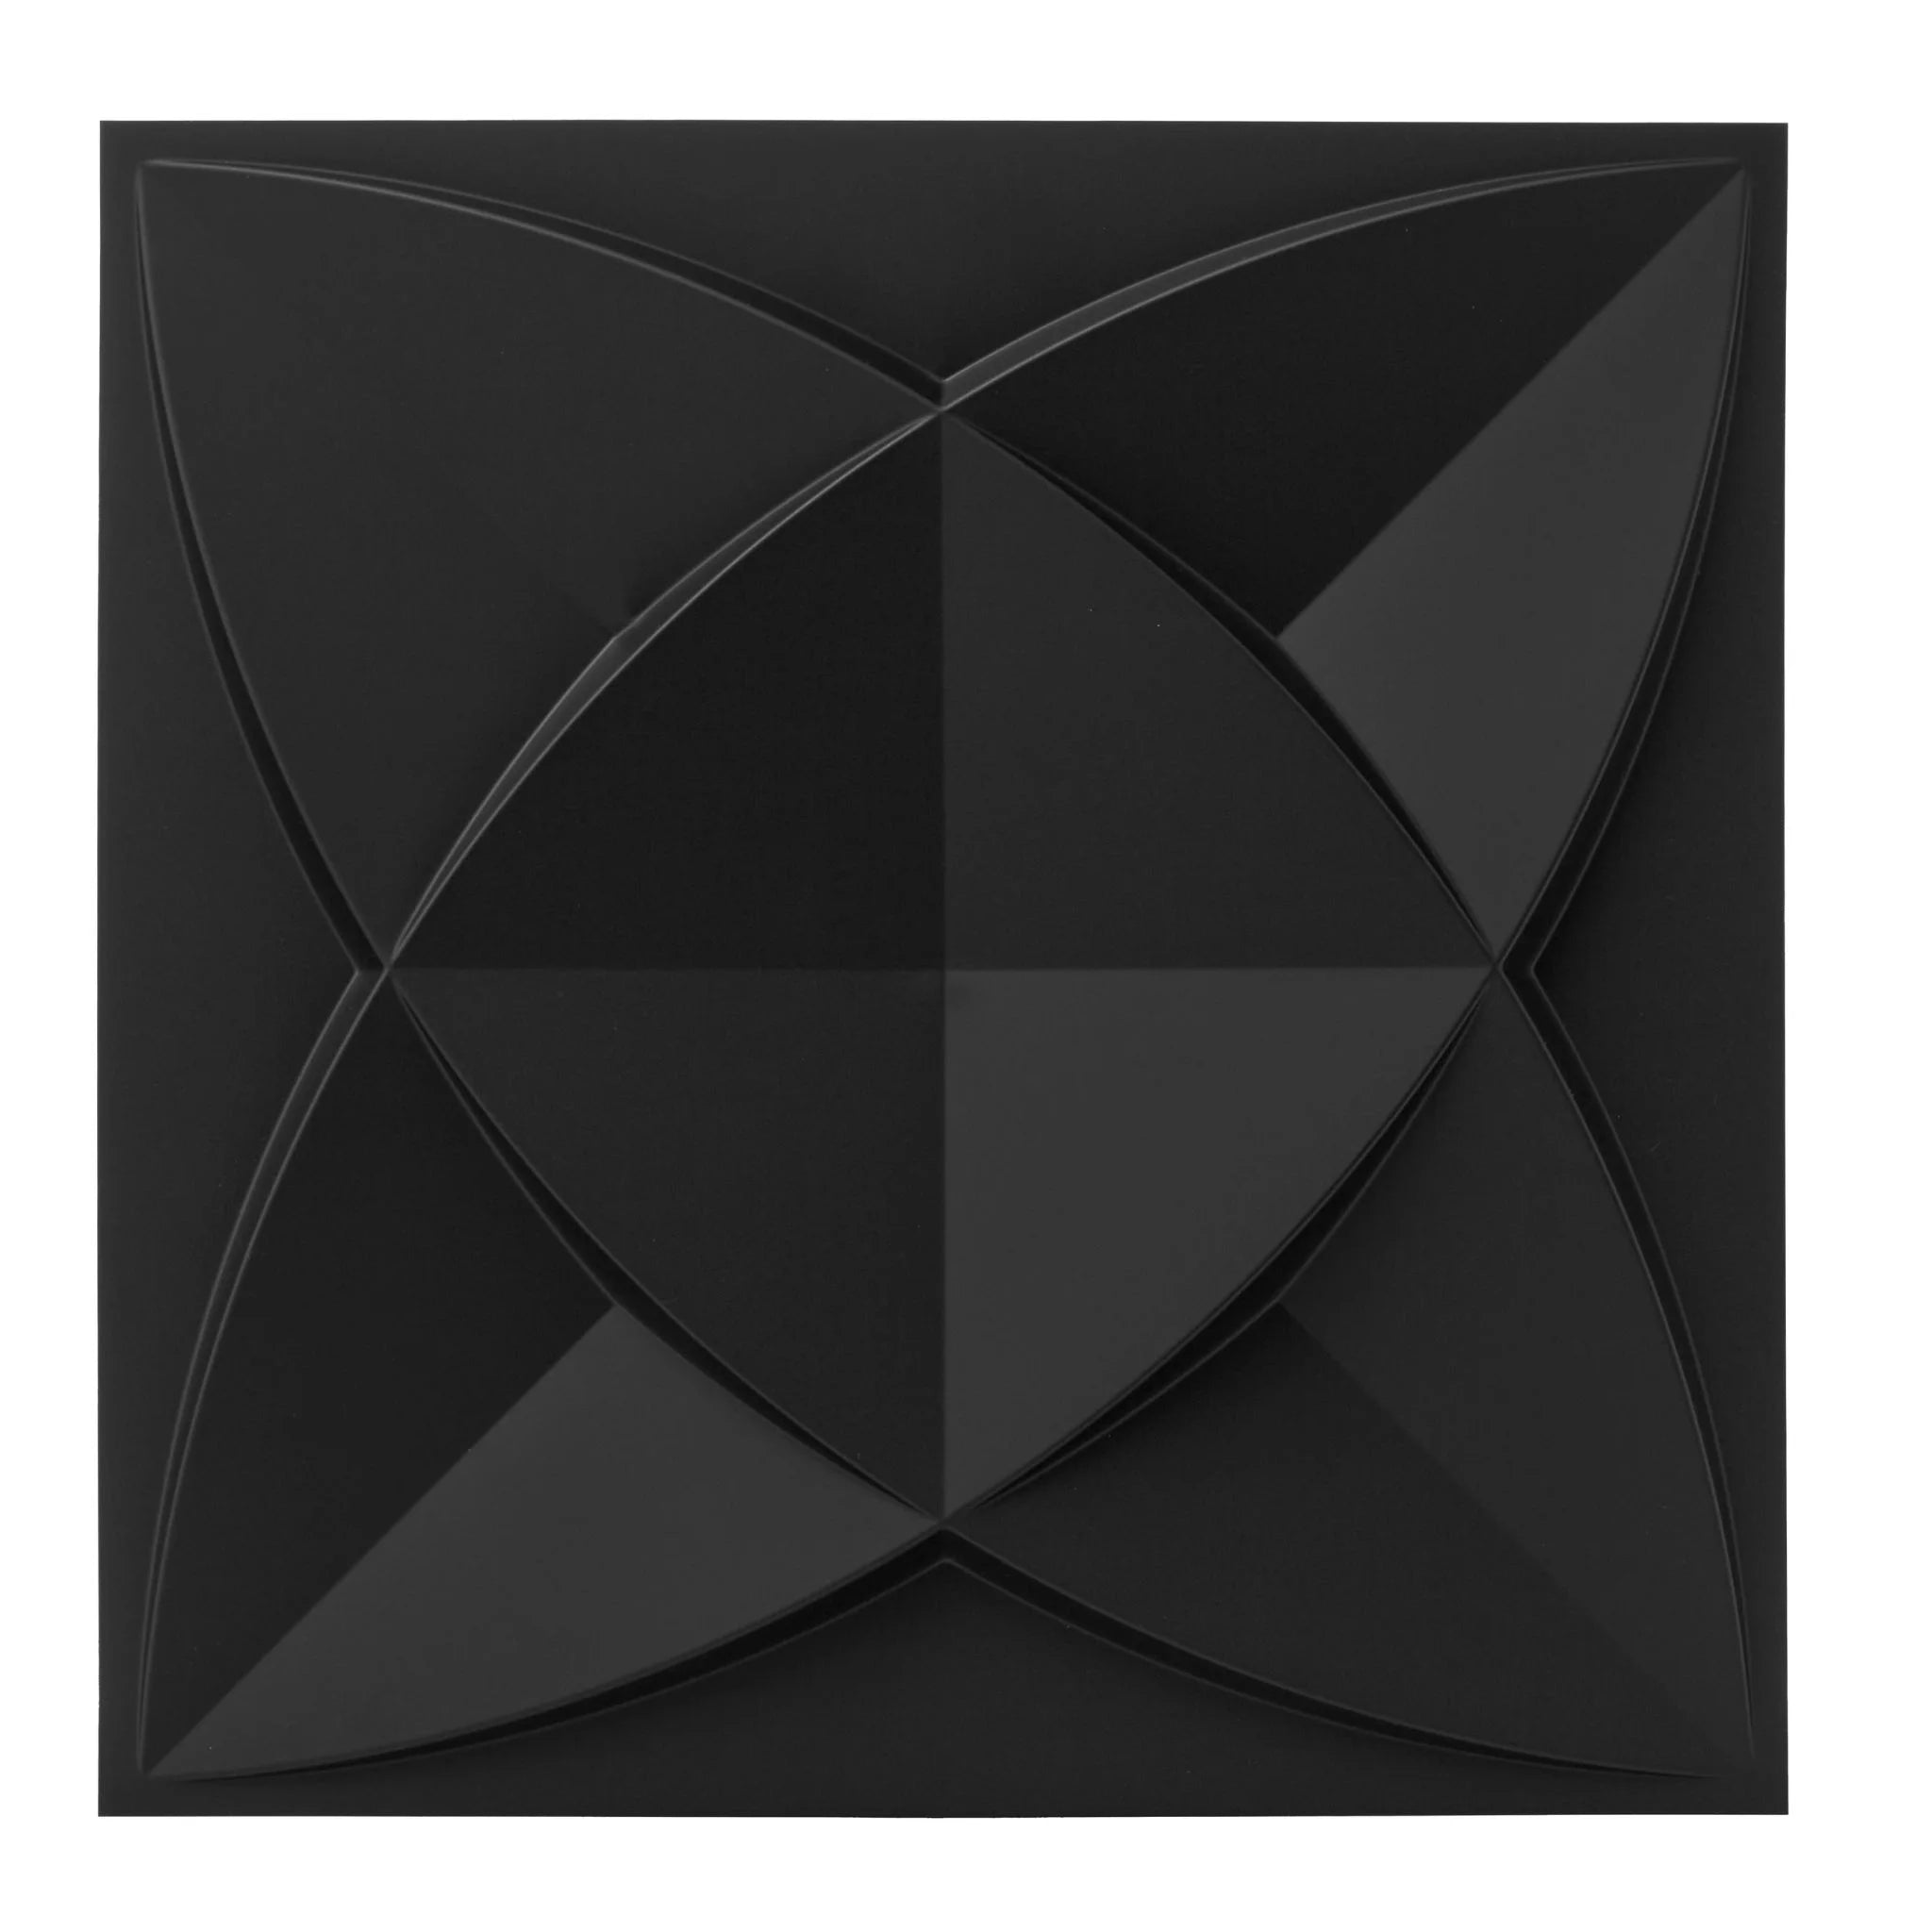 Black PVC wall panel with geometric patterns, close-up view